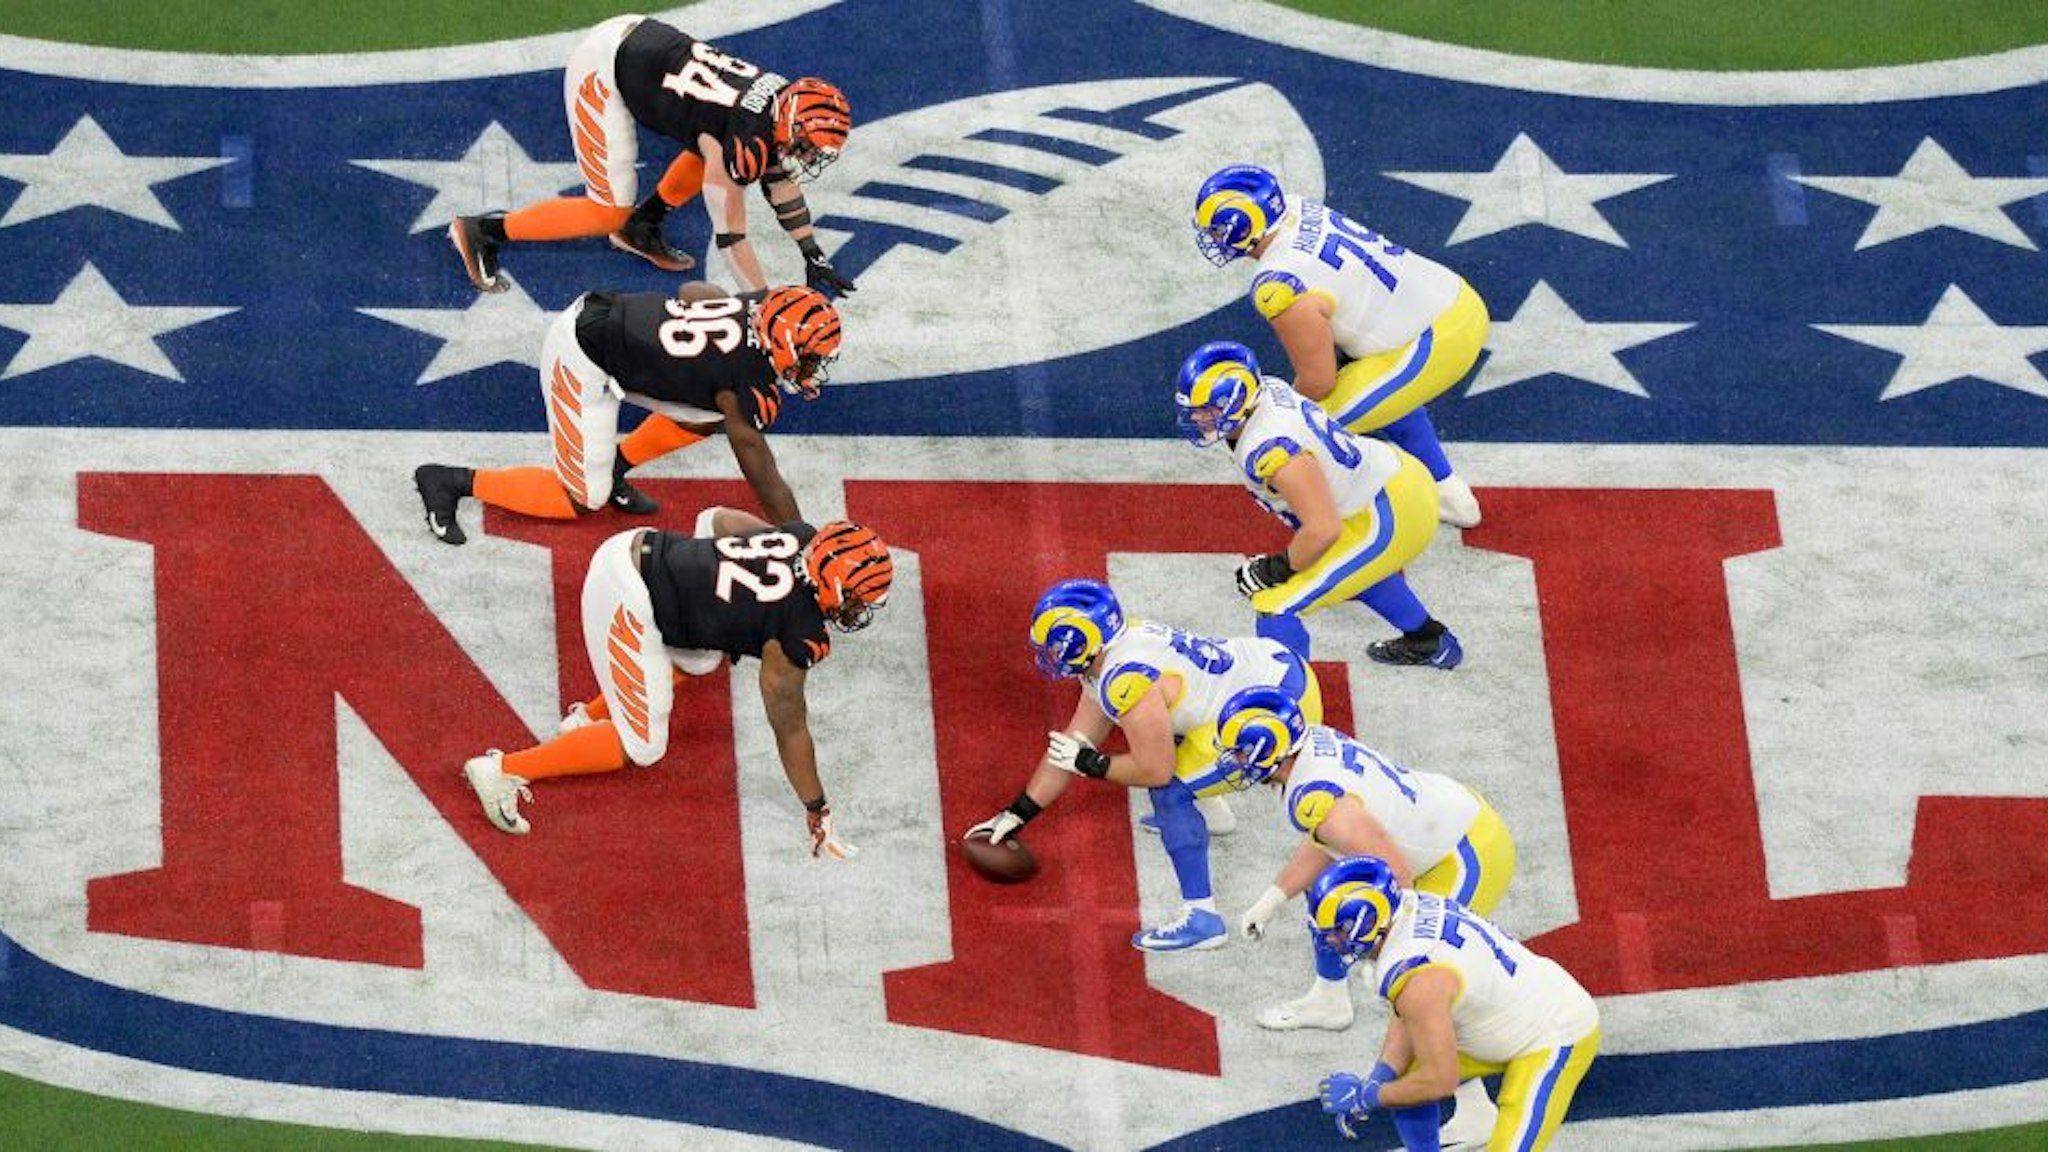 Players compete during the NFL Super Bowl LVI match between Cincinnati Bengals and Los Angeles Rams at SoFi Stadium in Los Angeles, the United States, Feb. 13, 2022. (Photo by Xinhua via Getty Images)